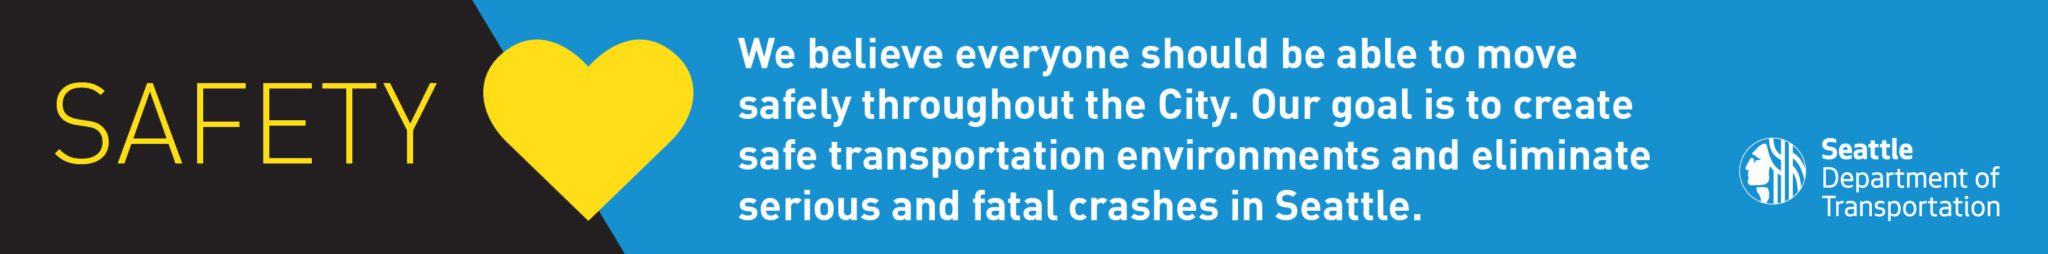 Graphic highlighting safety as one of SDOT's core values and goals. The graphic shows the word "Safety" in large text, a heart icon, some describing text, and the SDOT logo, with a blue and black background.